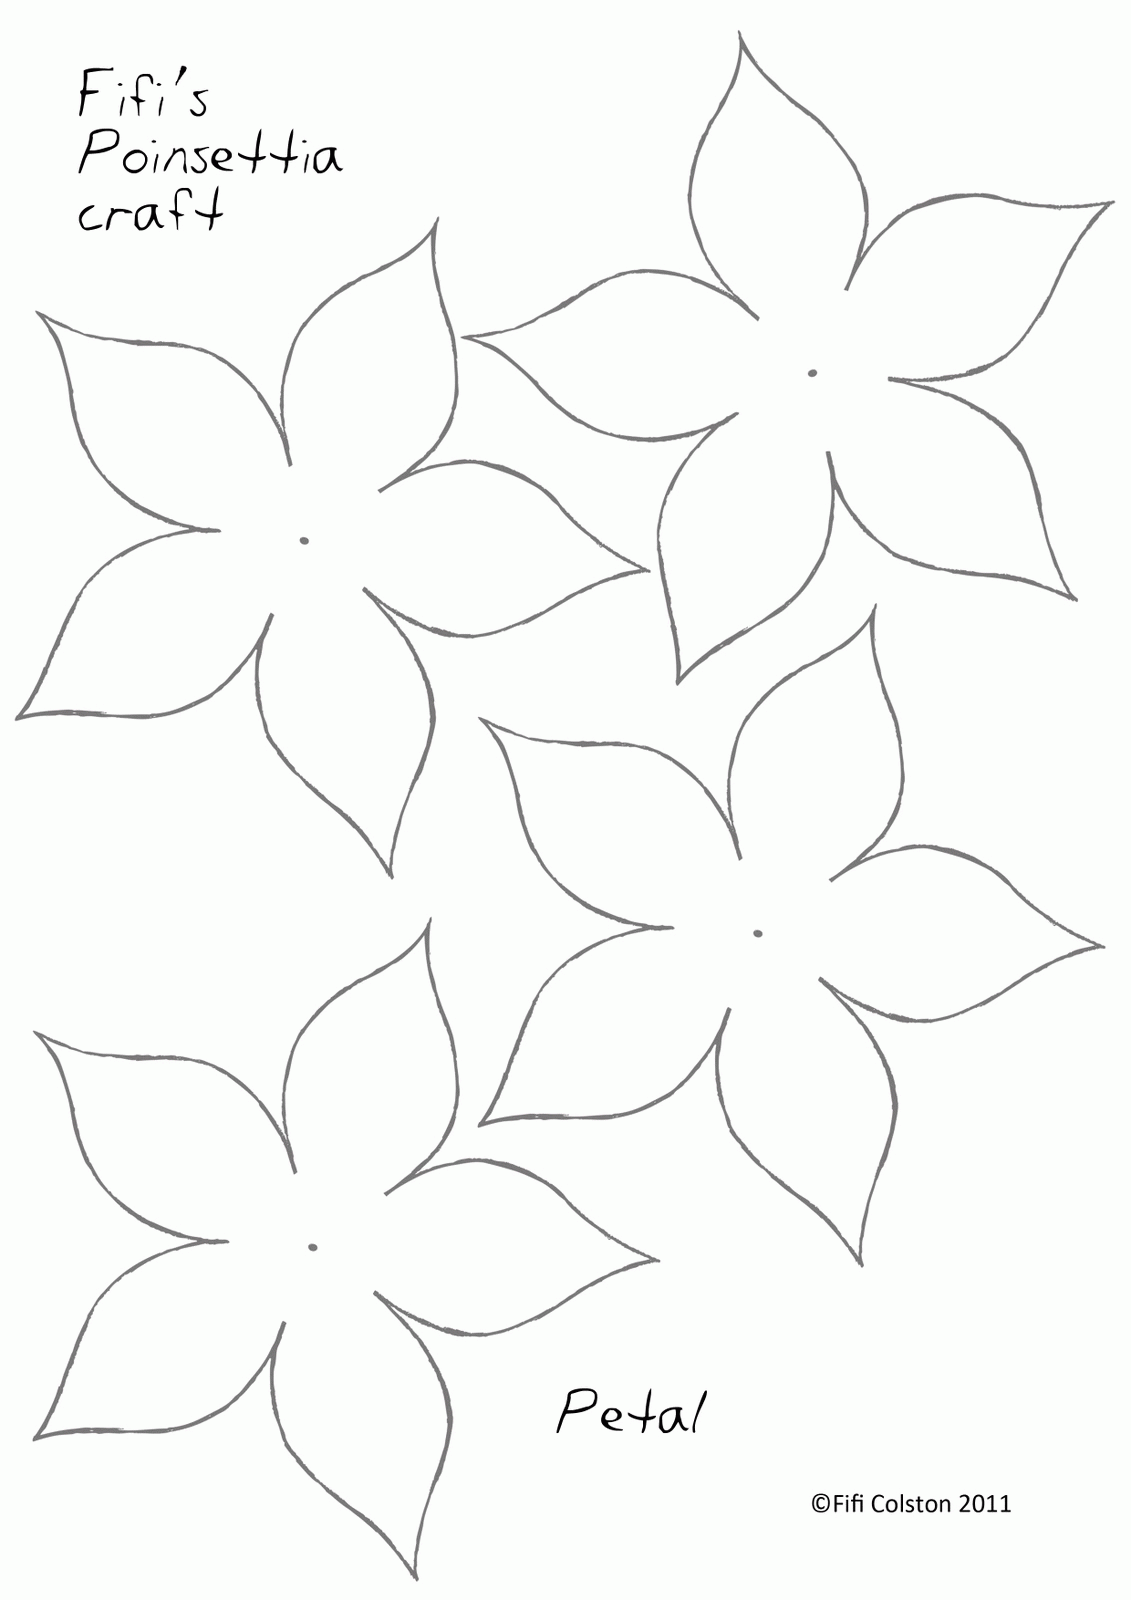 Merry Christmas and all the very best for the coming year, Fifi - Fifi Colston Creative: Pretty Paper Poinsettias - Printable Poinsettia Template